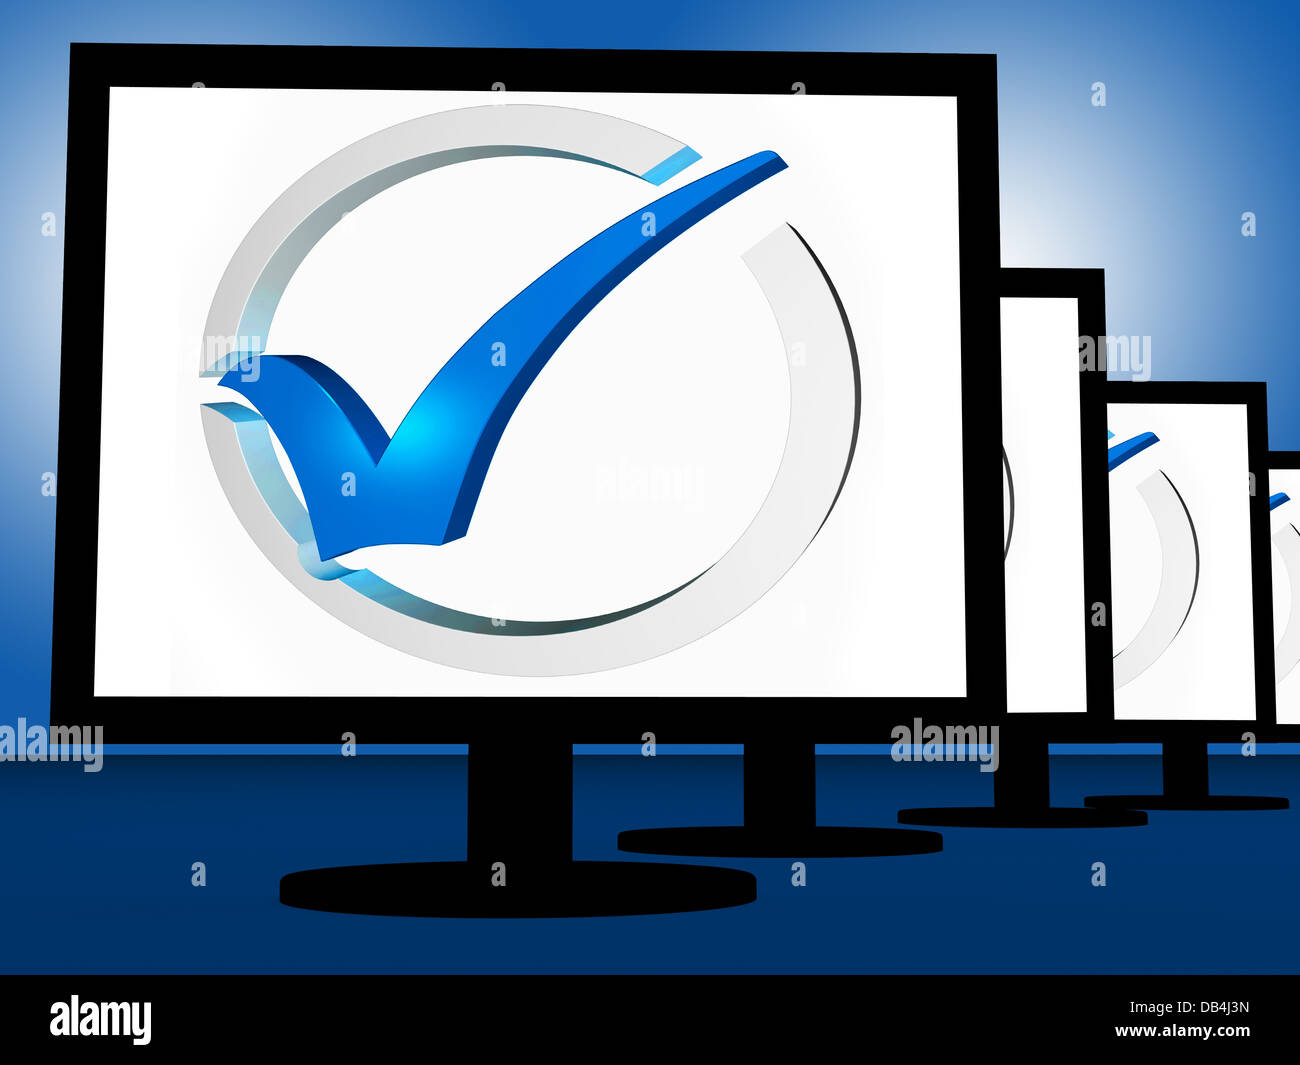 Check Mark On Monitors Shows User's Satisfaction Stock Photo